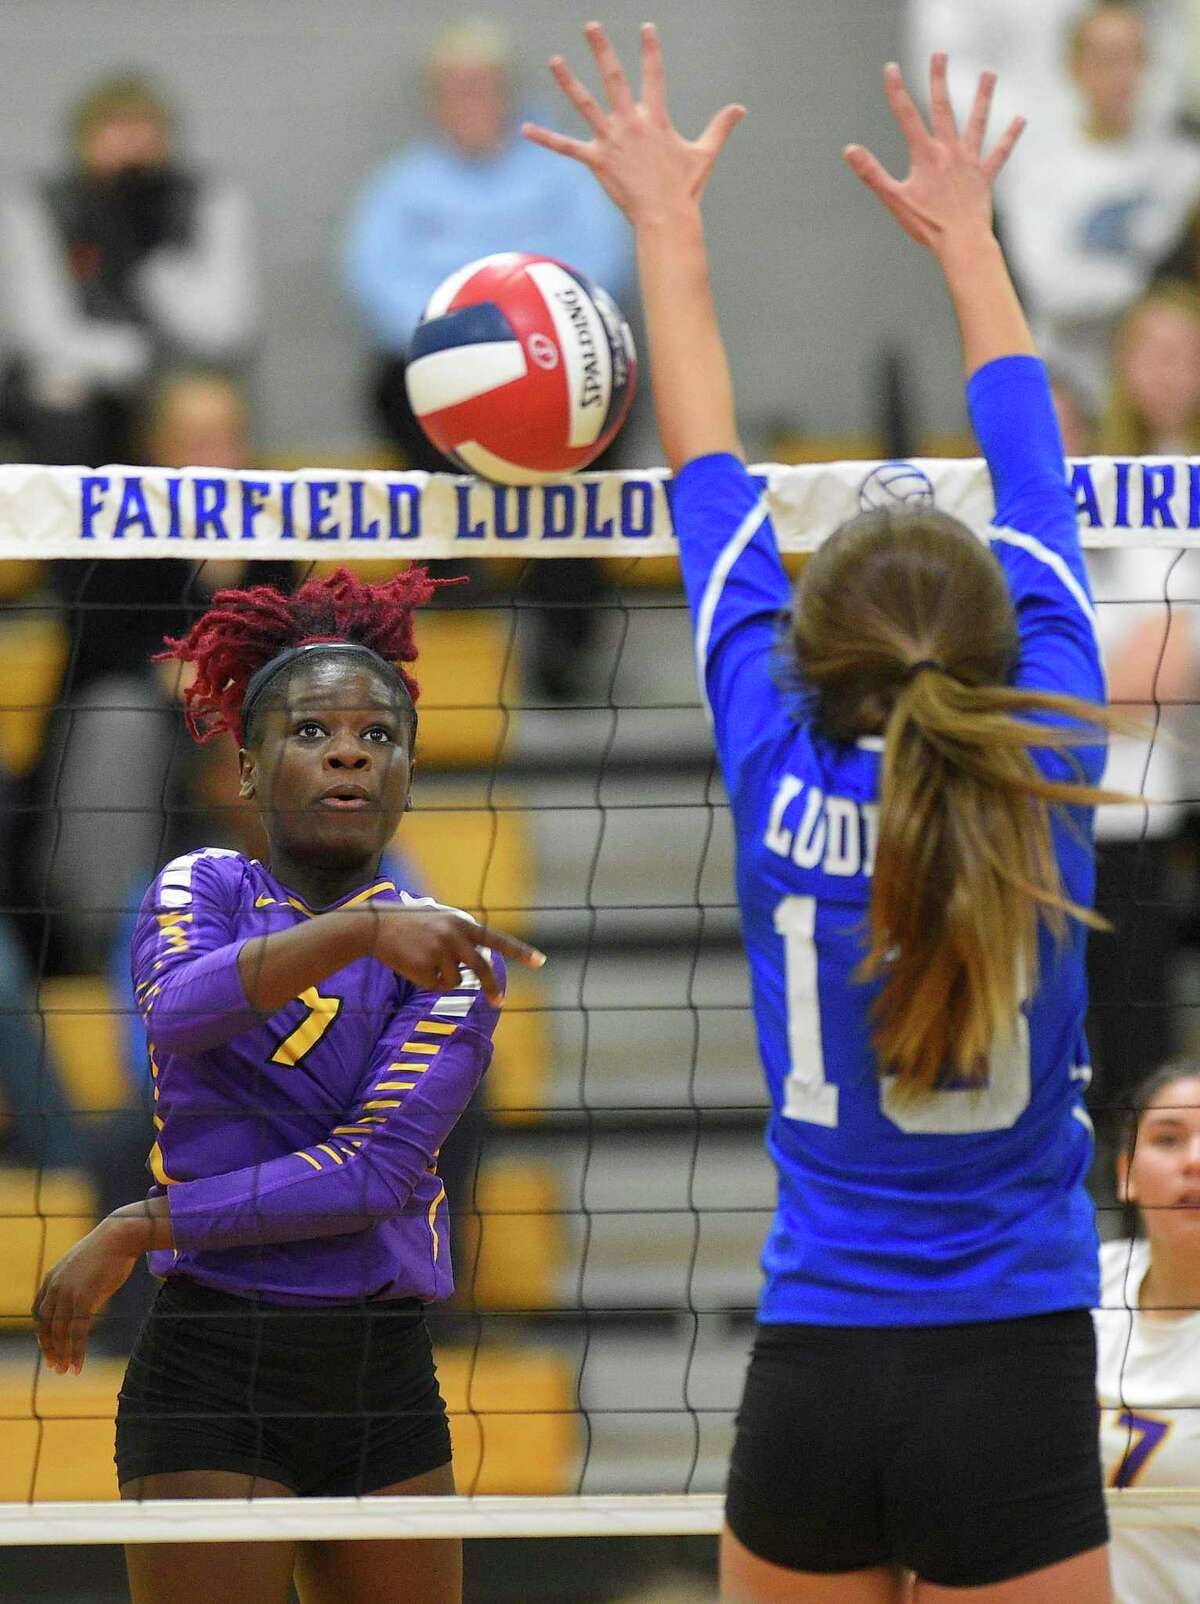 Westhill's Gloria Twum (7) hits a hard shot past Fairfiled Ludlowes Jo Blanco. Fairfield Ludlowe won the 5th set 15-9 to take the FCIAC volleyball championship 3-2 over Westhill on Nov. 9, 2019 in Fairfield, Connecticut.